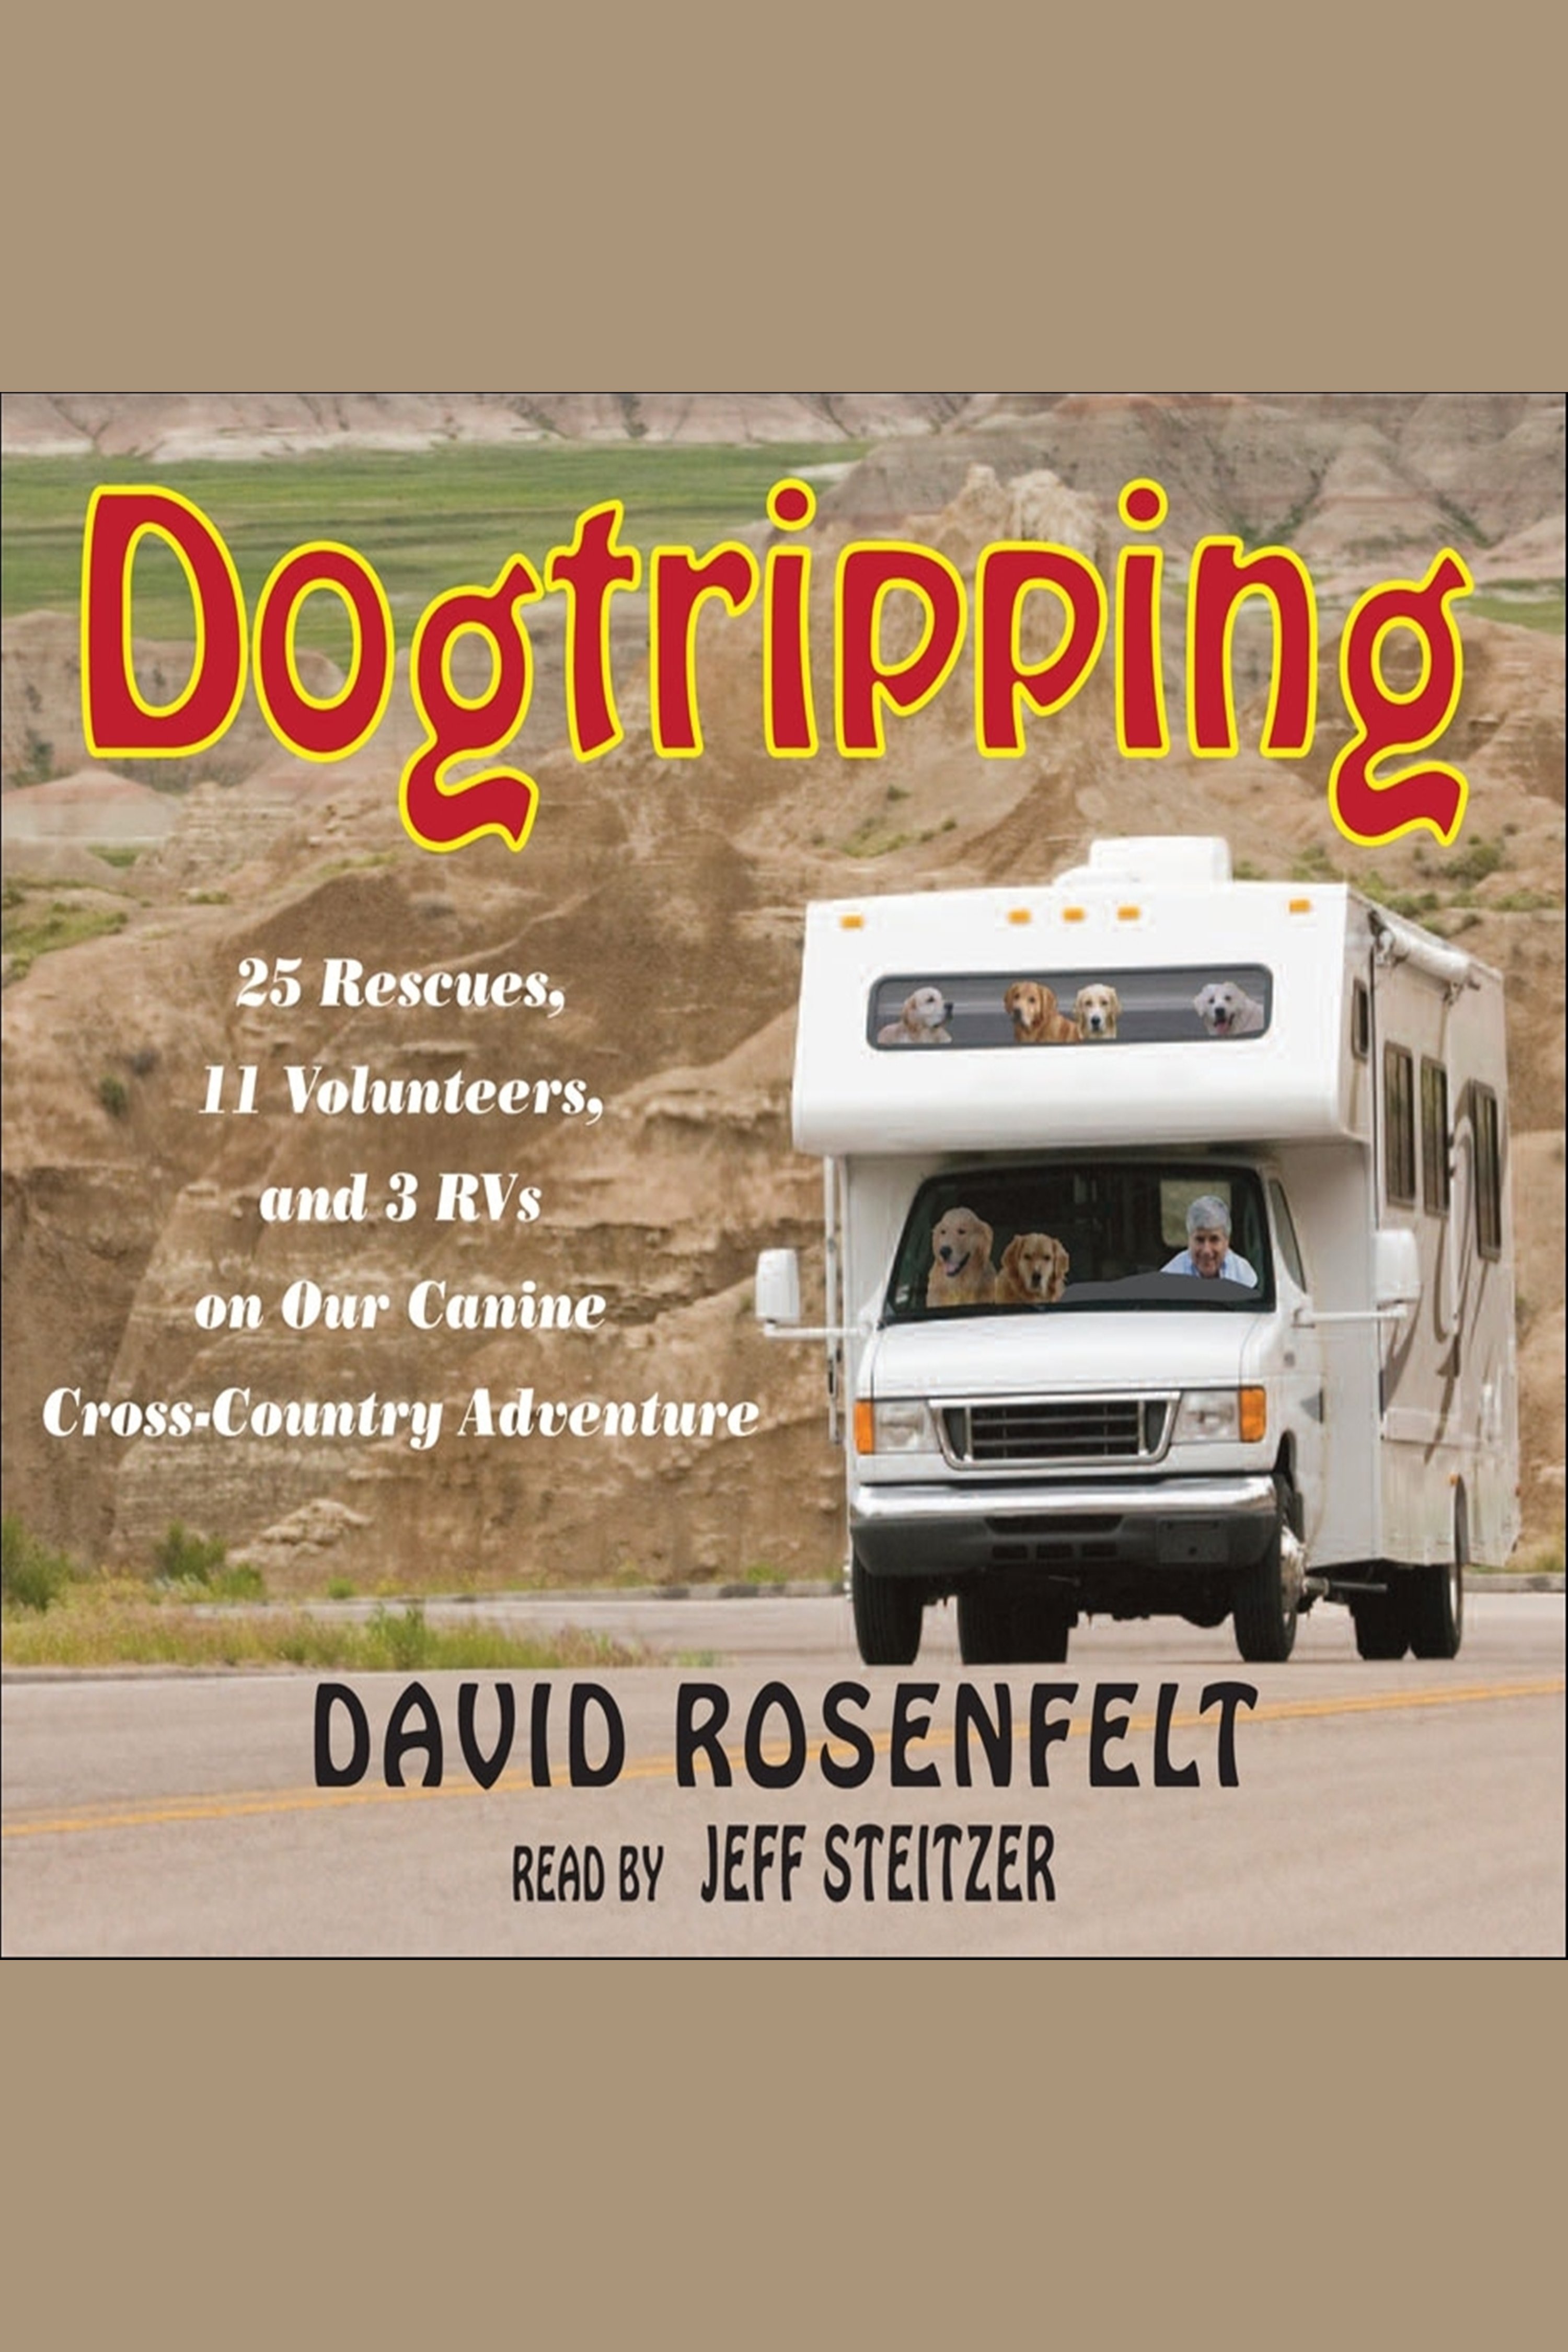 Cover image for Dogtripping [electronic resource] : 25 Rescues, 11 Volunteers, and 3 RVs on Our Canine Cross-Country Adventure